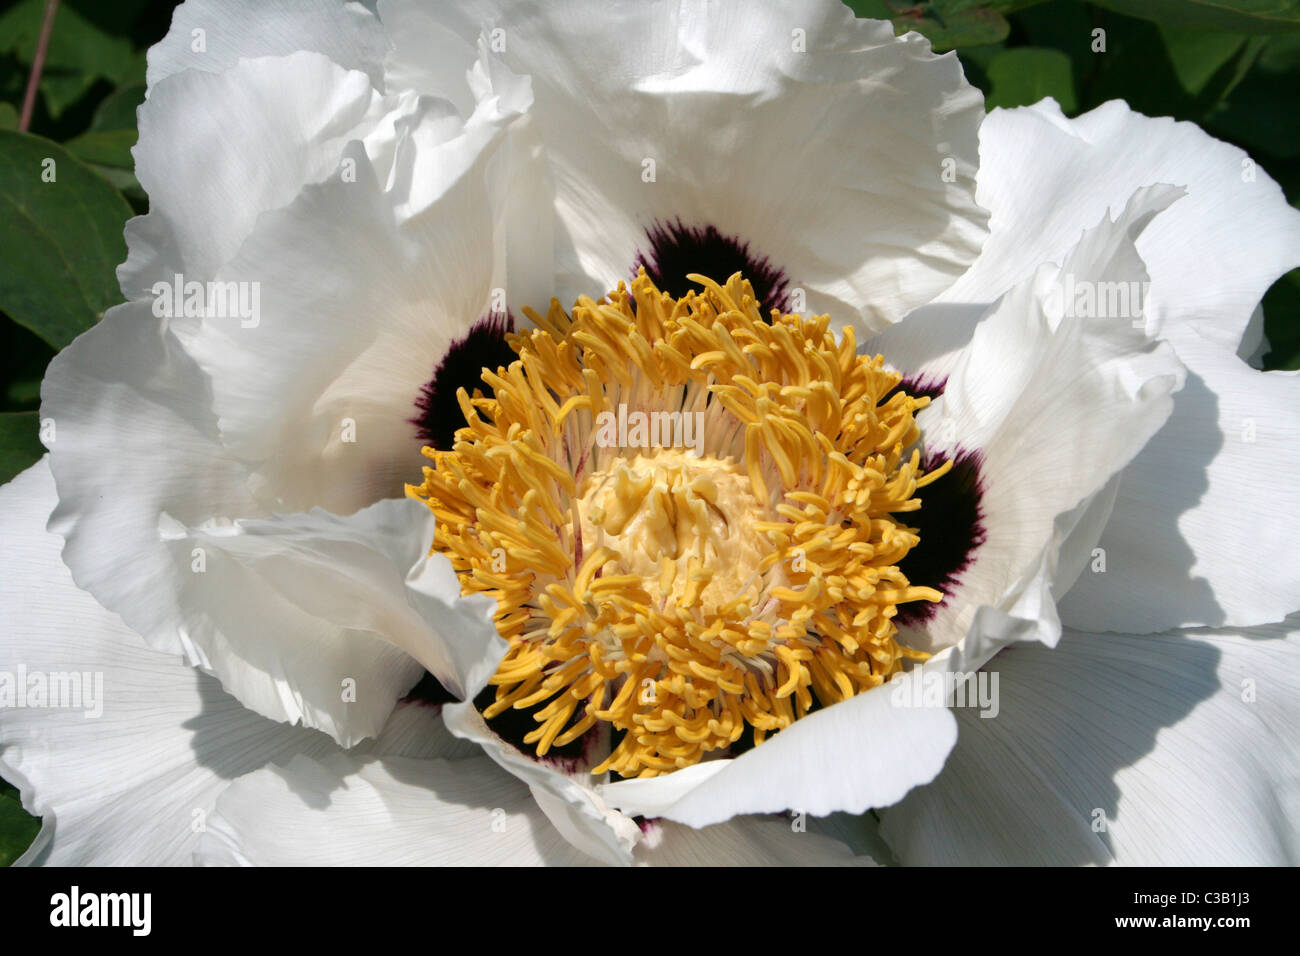 Detail On A Tree Peony Flower Paeonia suffruticosa 'Rock's Form' Stock Photo